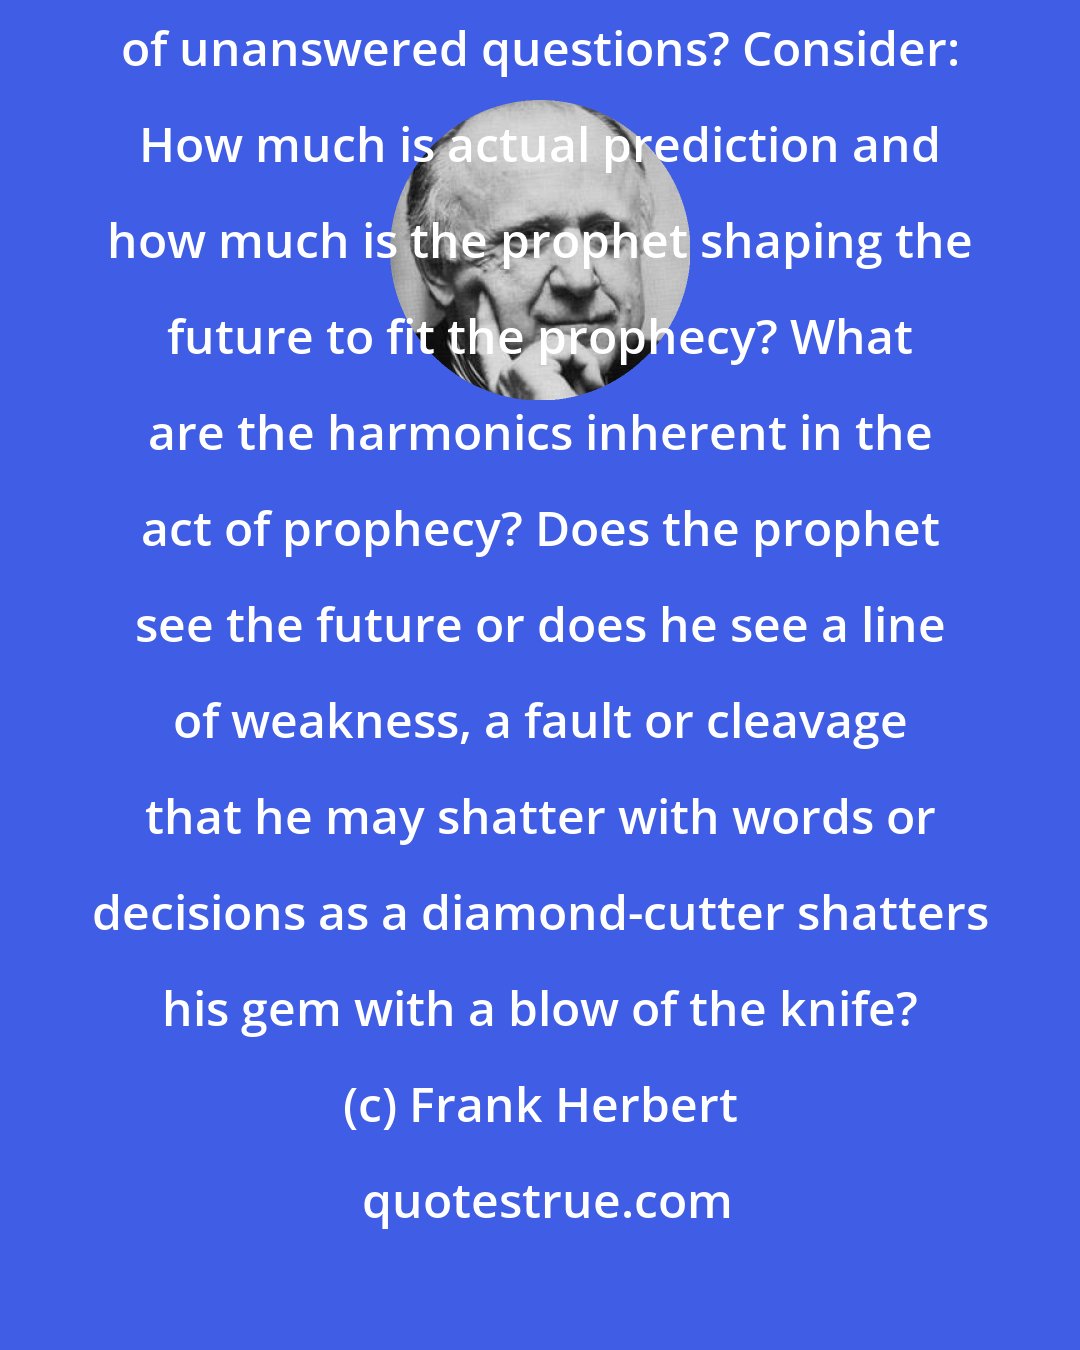 Frank Herbert: Prophecy and prescience - How can they be put to the test in the face of unanswered questions? Consider: How much is actual prediction and how much is the prophet shaping the future to fit the prophecy? What are the harmonics inherent in the act of prophecy? Does the prophet see the future or does he see a line of weakness, a fault or cleavage that he may shatter with words or decisions as a diamond-cutter shatters his gem with a blow of the knife?